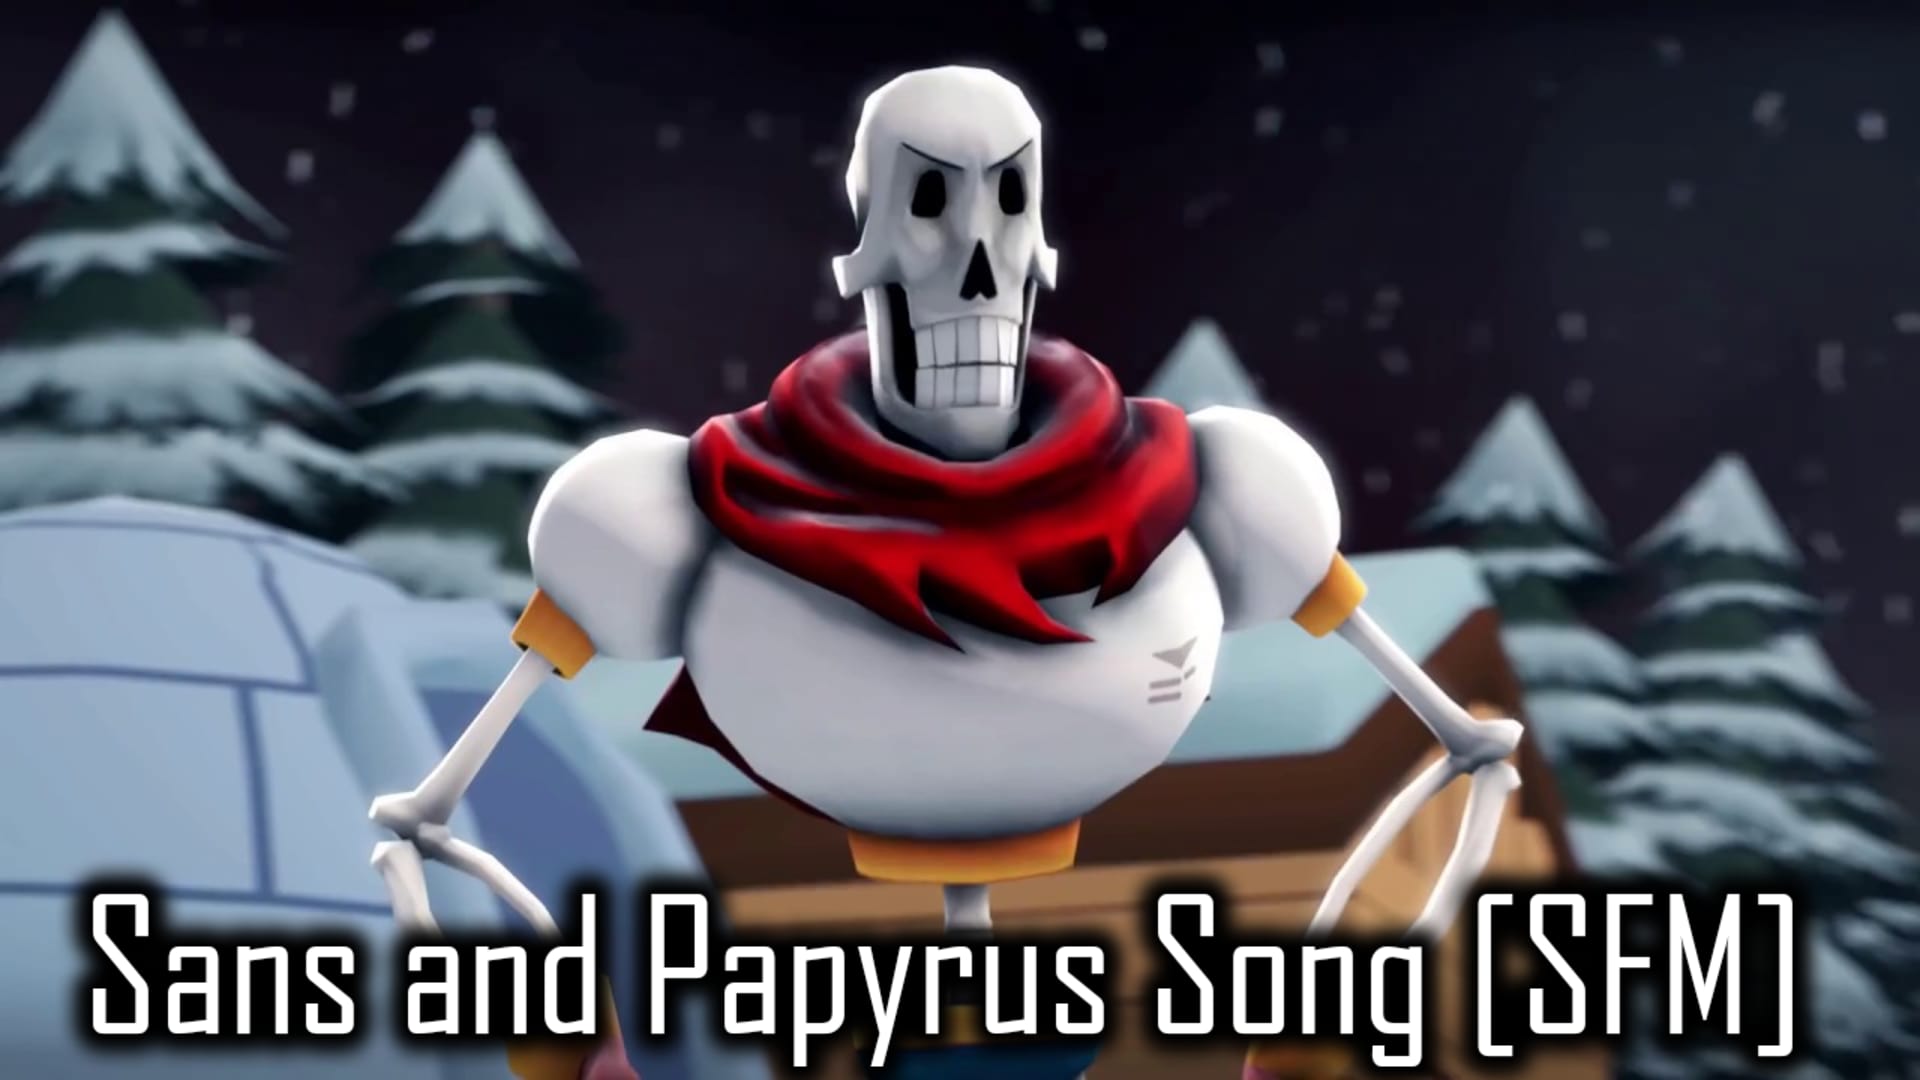 Jt music to the bone. Sans and Papyrus Song. Песня папируса. To the Bone Санс. Sans and Papyrus Song JT.